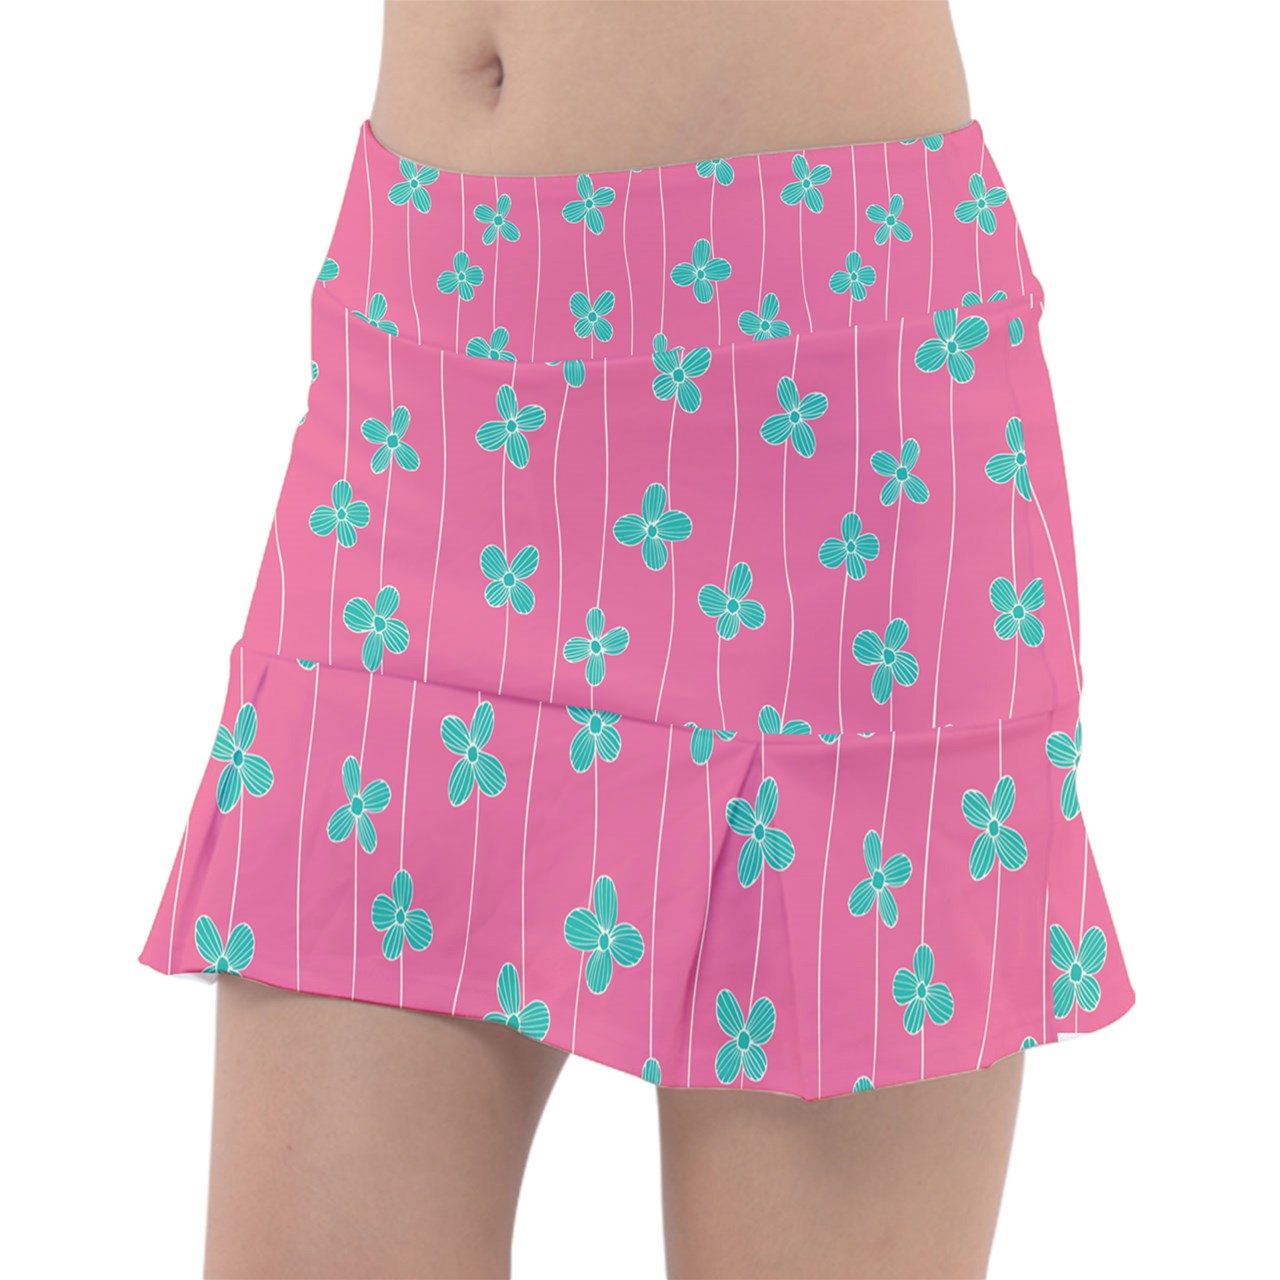 Dizzy Pickle Lesia Blossom PSC Women's Pickleball Classic Skort with Inner Shorts and Pockets